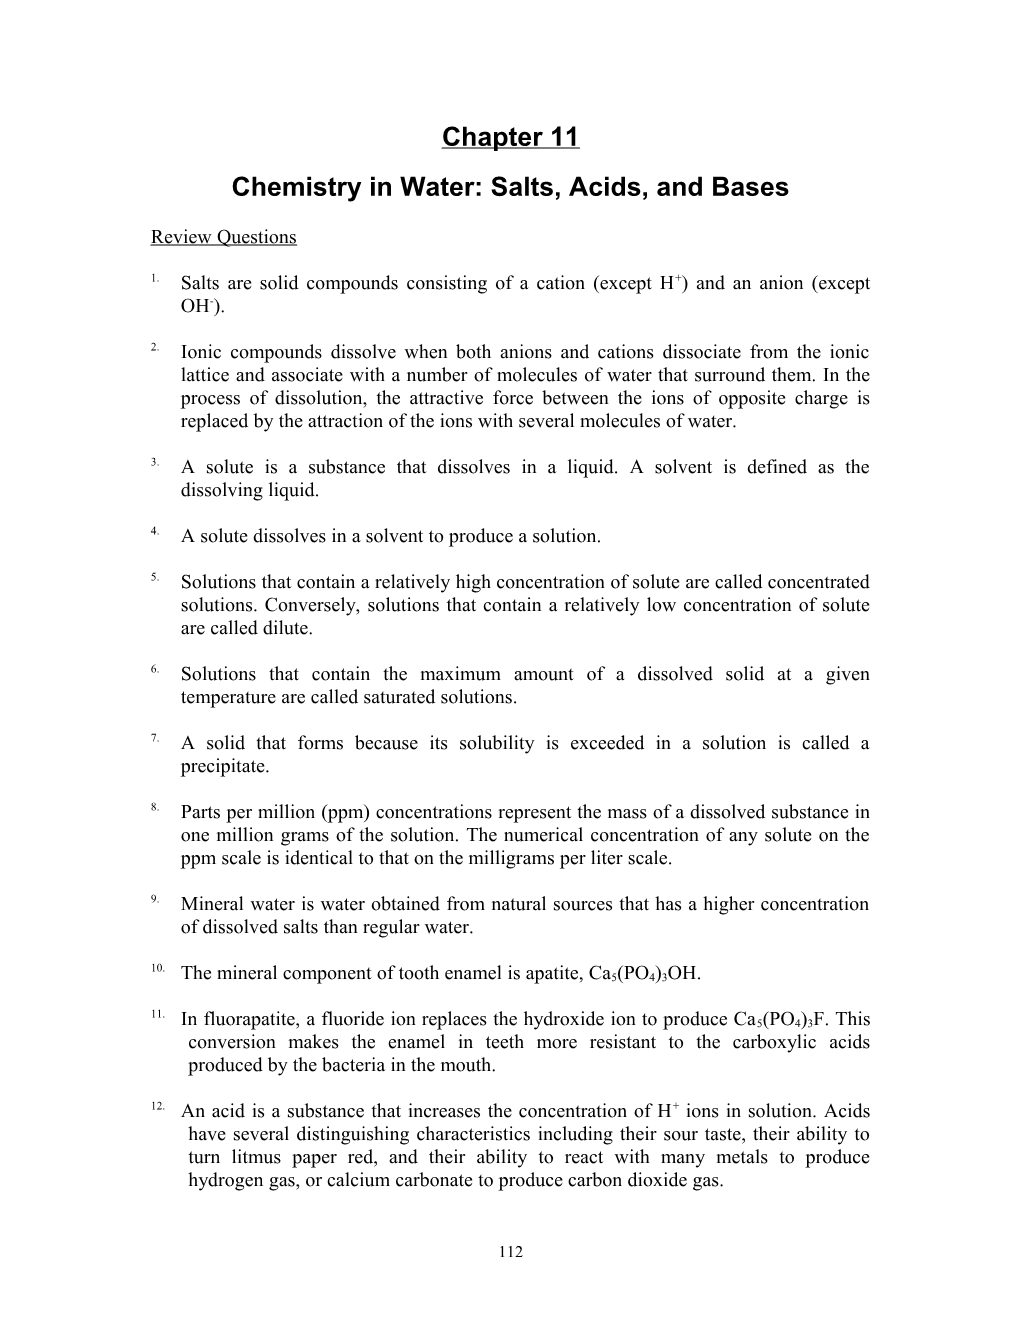 Chemistry in Water: Salts, Acids, and Bases